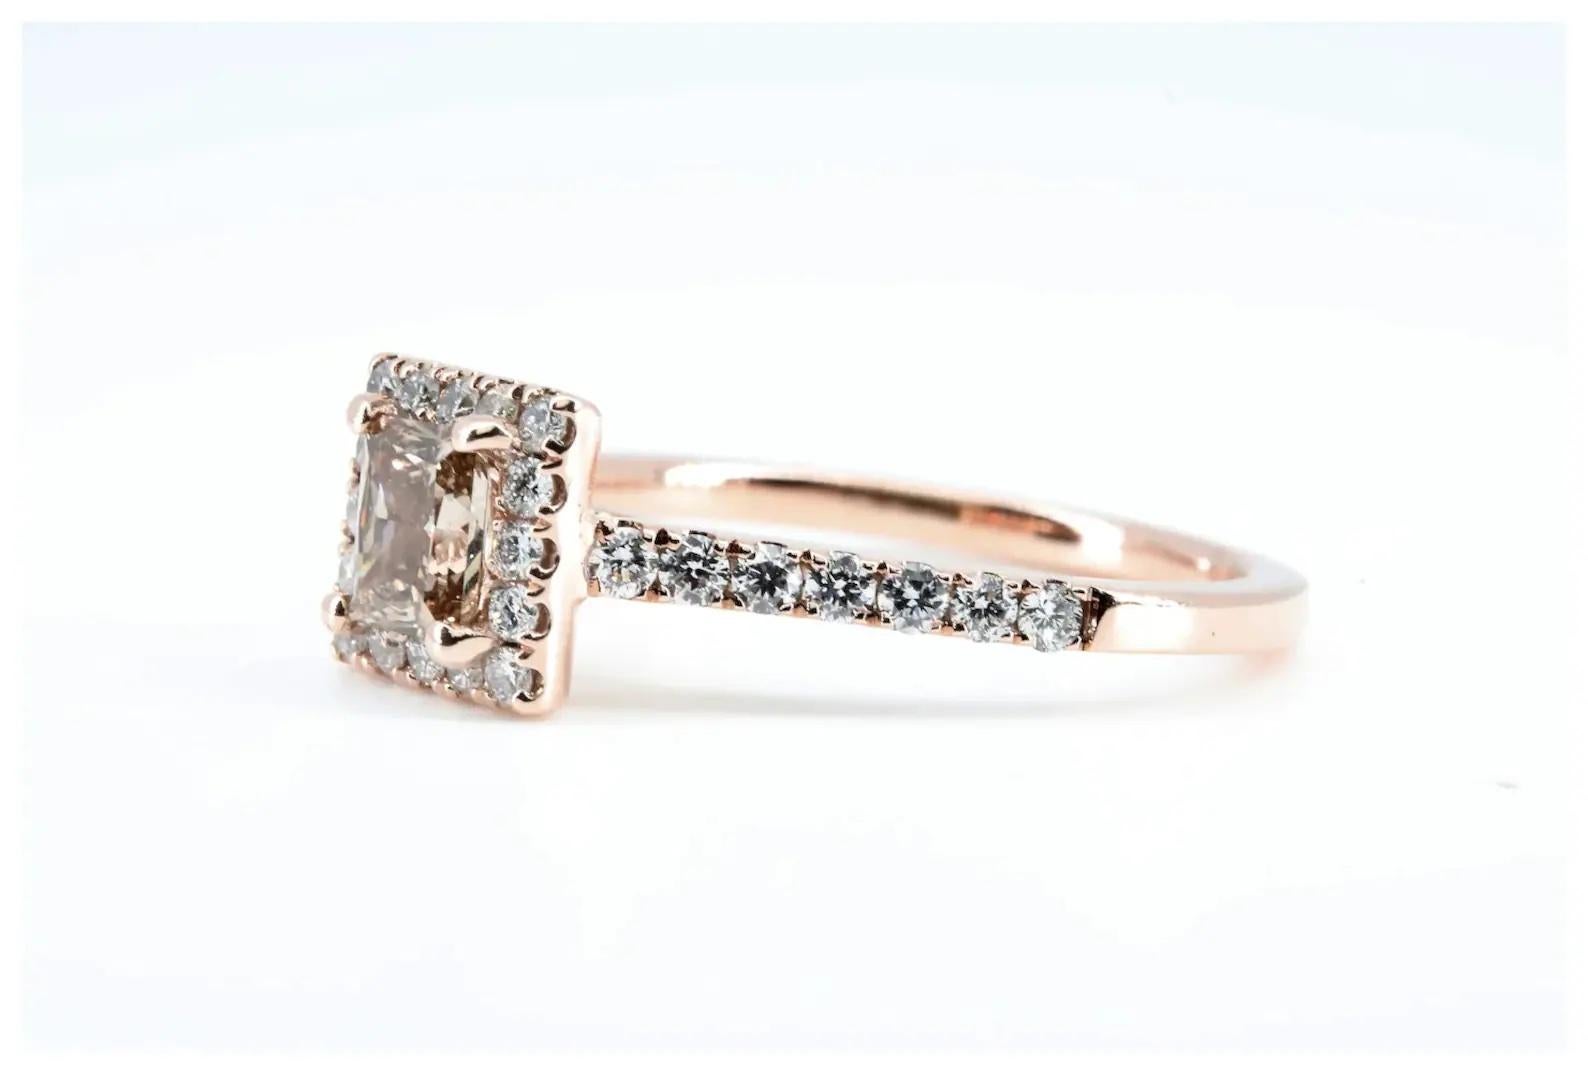 A champagne and colorless diamond engagement ring in 14 karat rose gold.

Centered by a 0.75 carat fancy rectangular radiant cut champagne diamond of VS2 clarity.

Accented further by 0.20 carats of G color, VS2 clarity pave set round cut